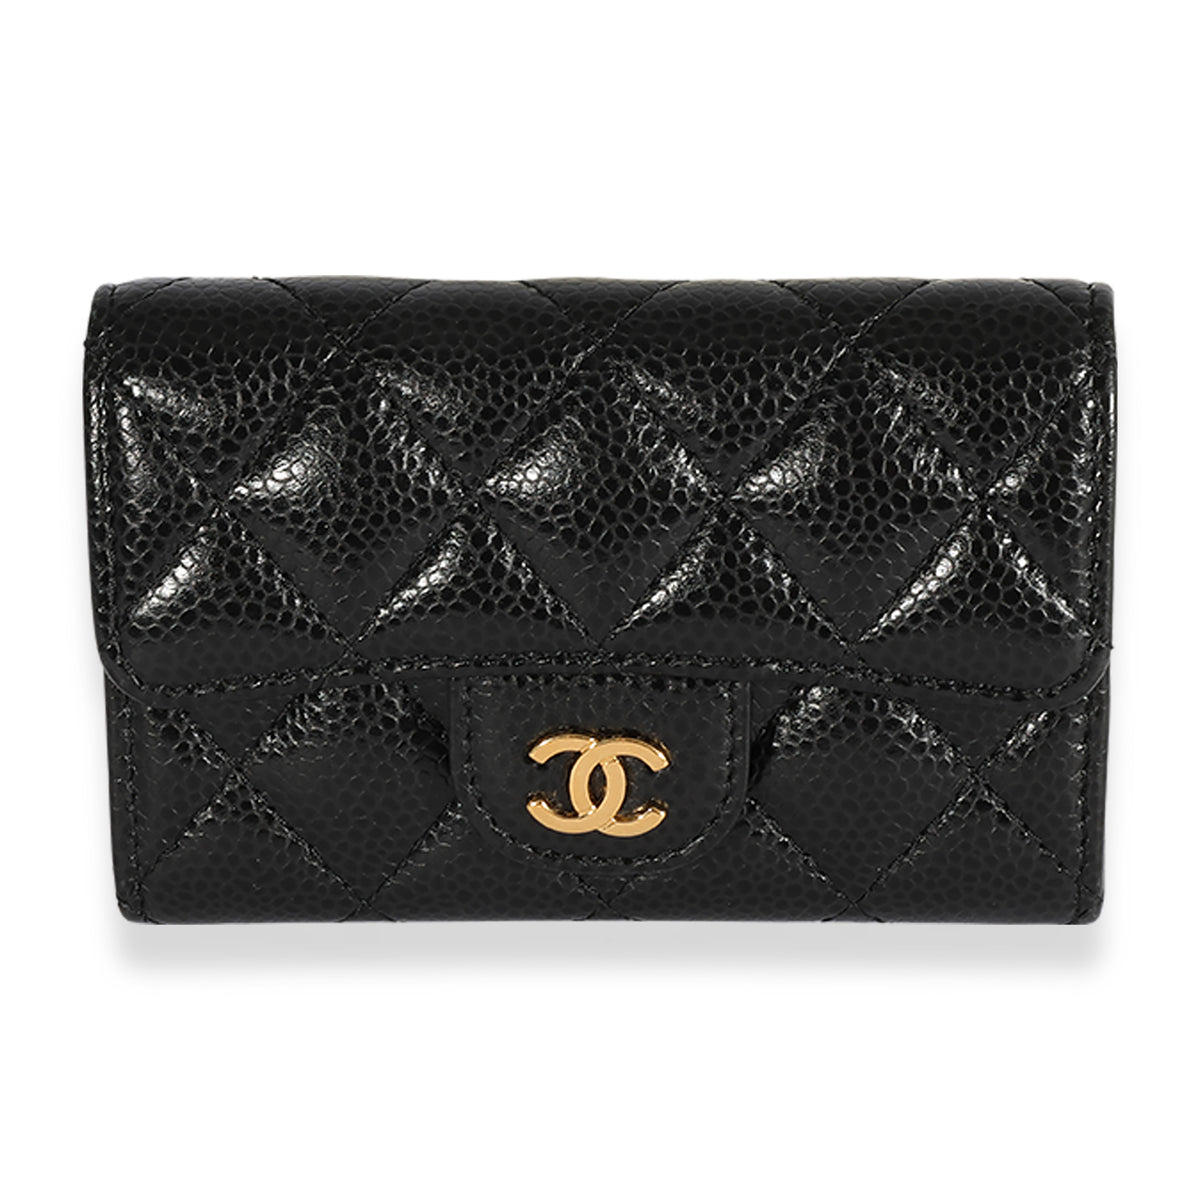 Chanel Black Quilted Caviar Small Classic Flap Bag, myGemma